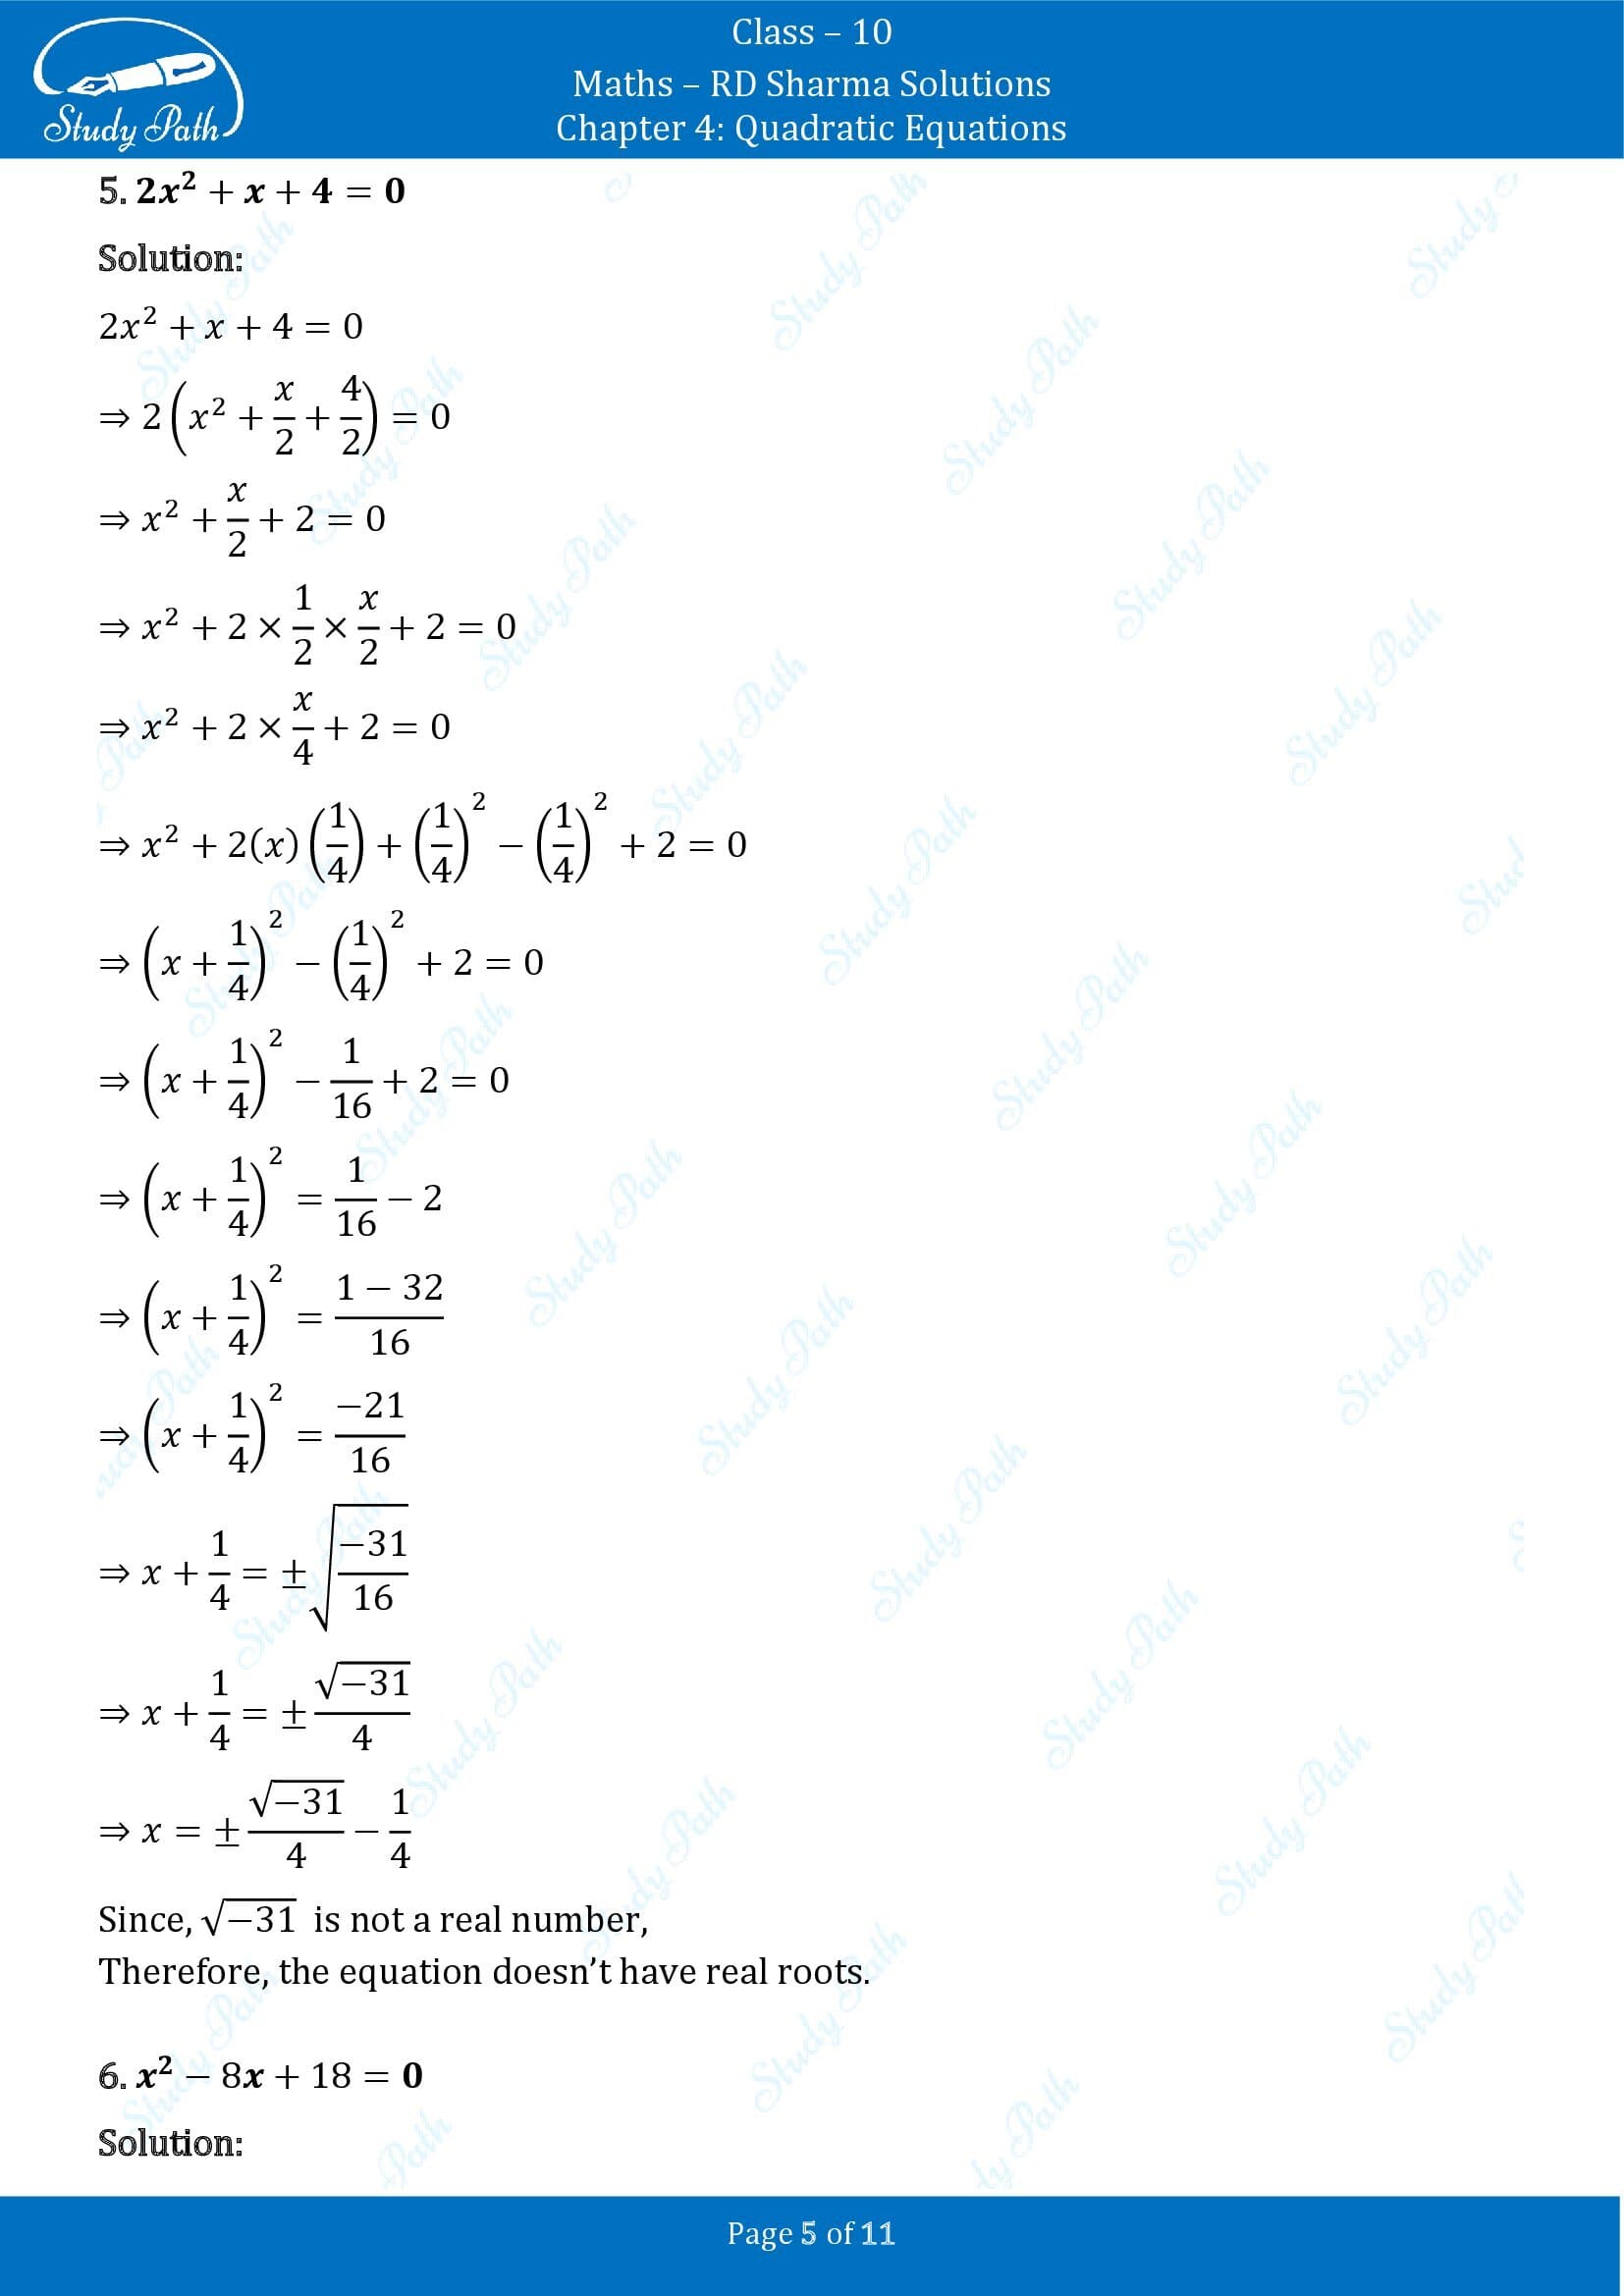 RD Sharma Solutions Class 10 Chapter 4 Quadratic Equations Exercise 4.4 00005